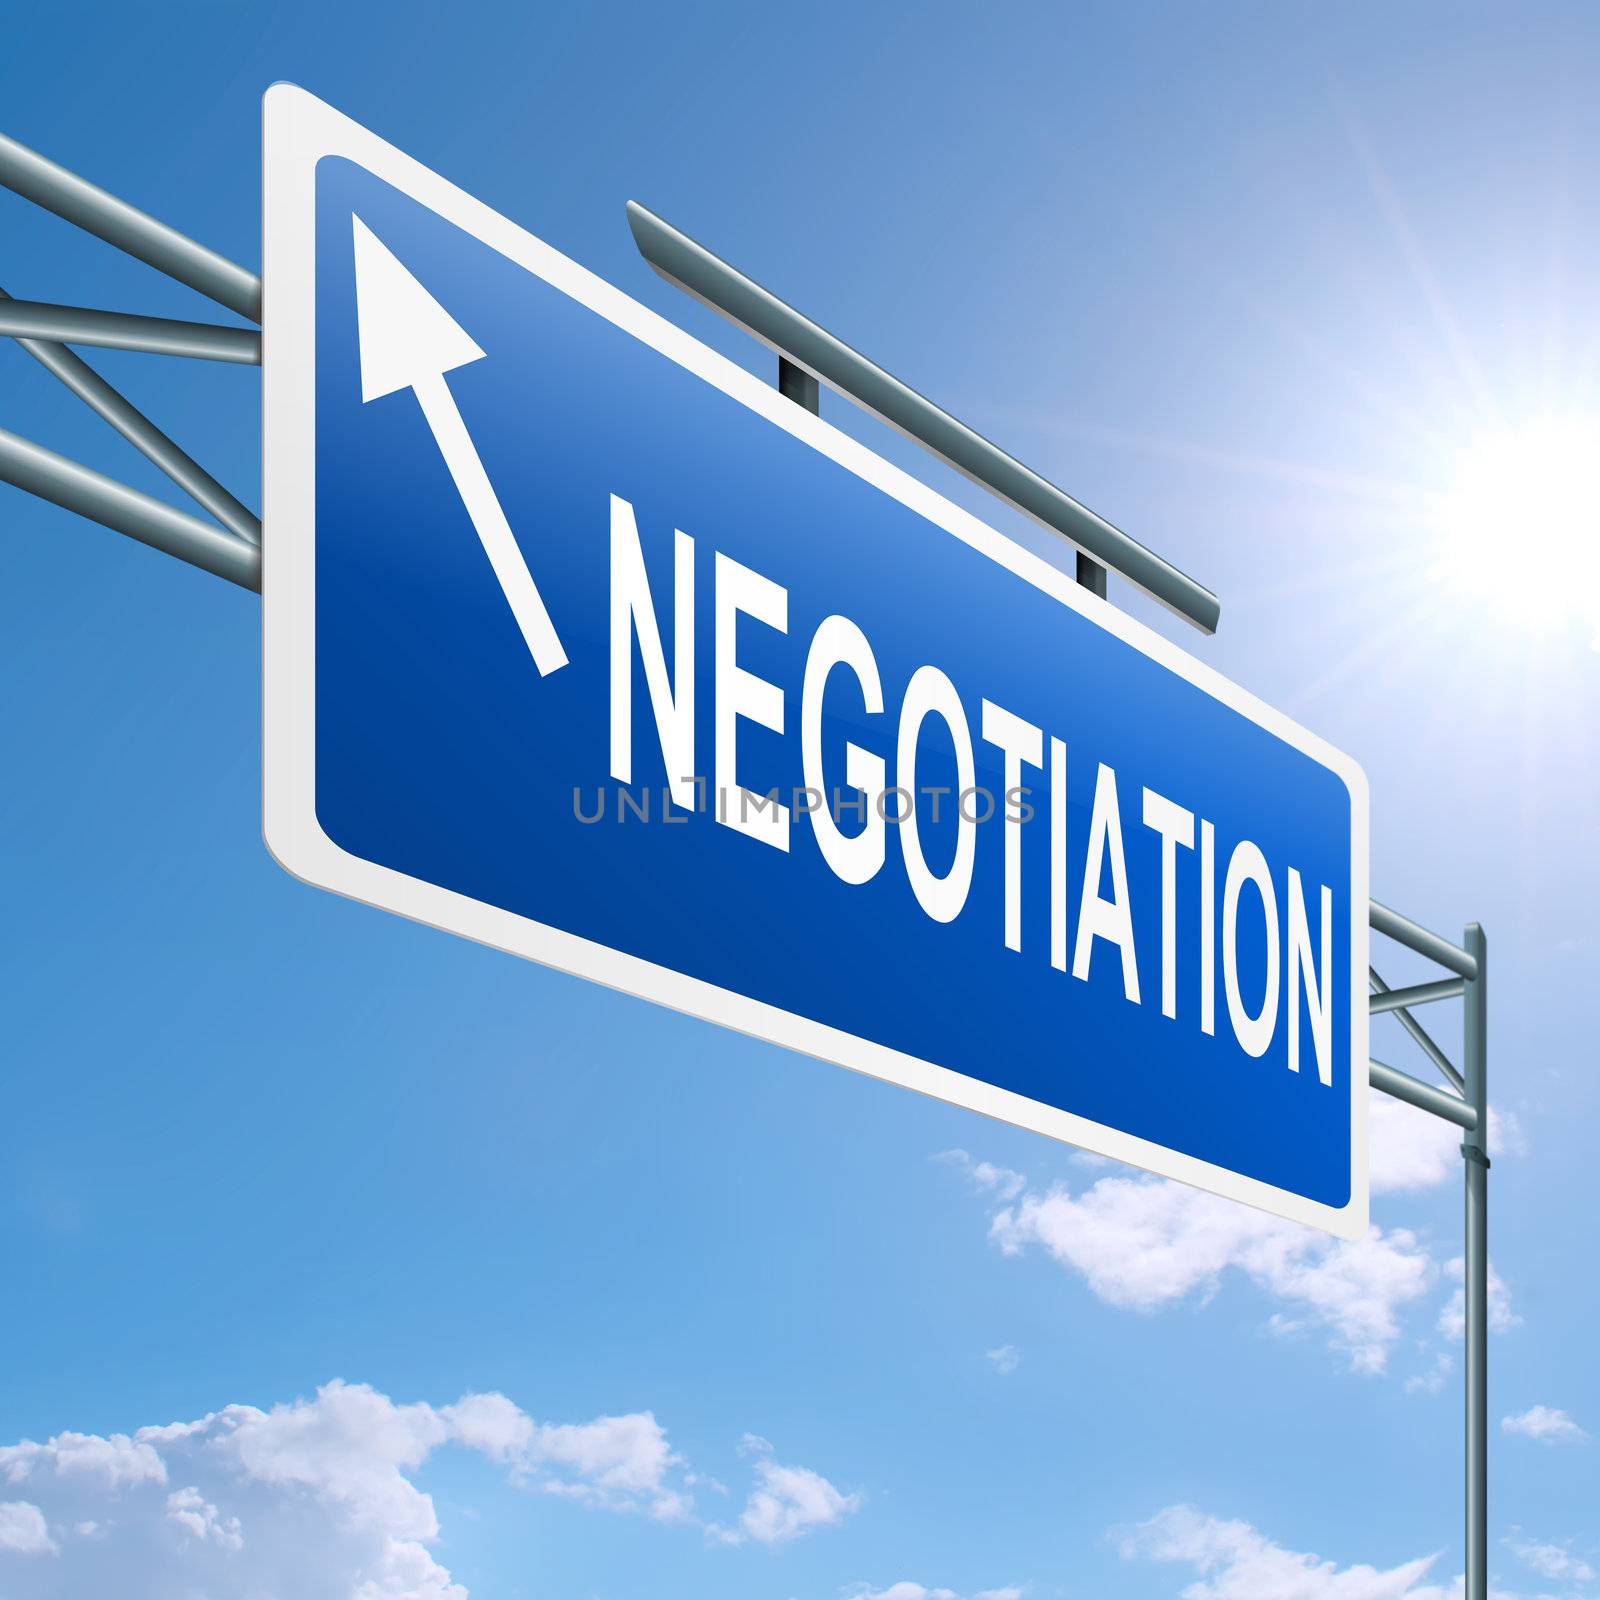 Illustration depicting a highway gantry sign with a negotiation concept. Blue sky background.